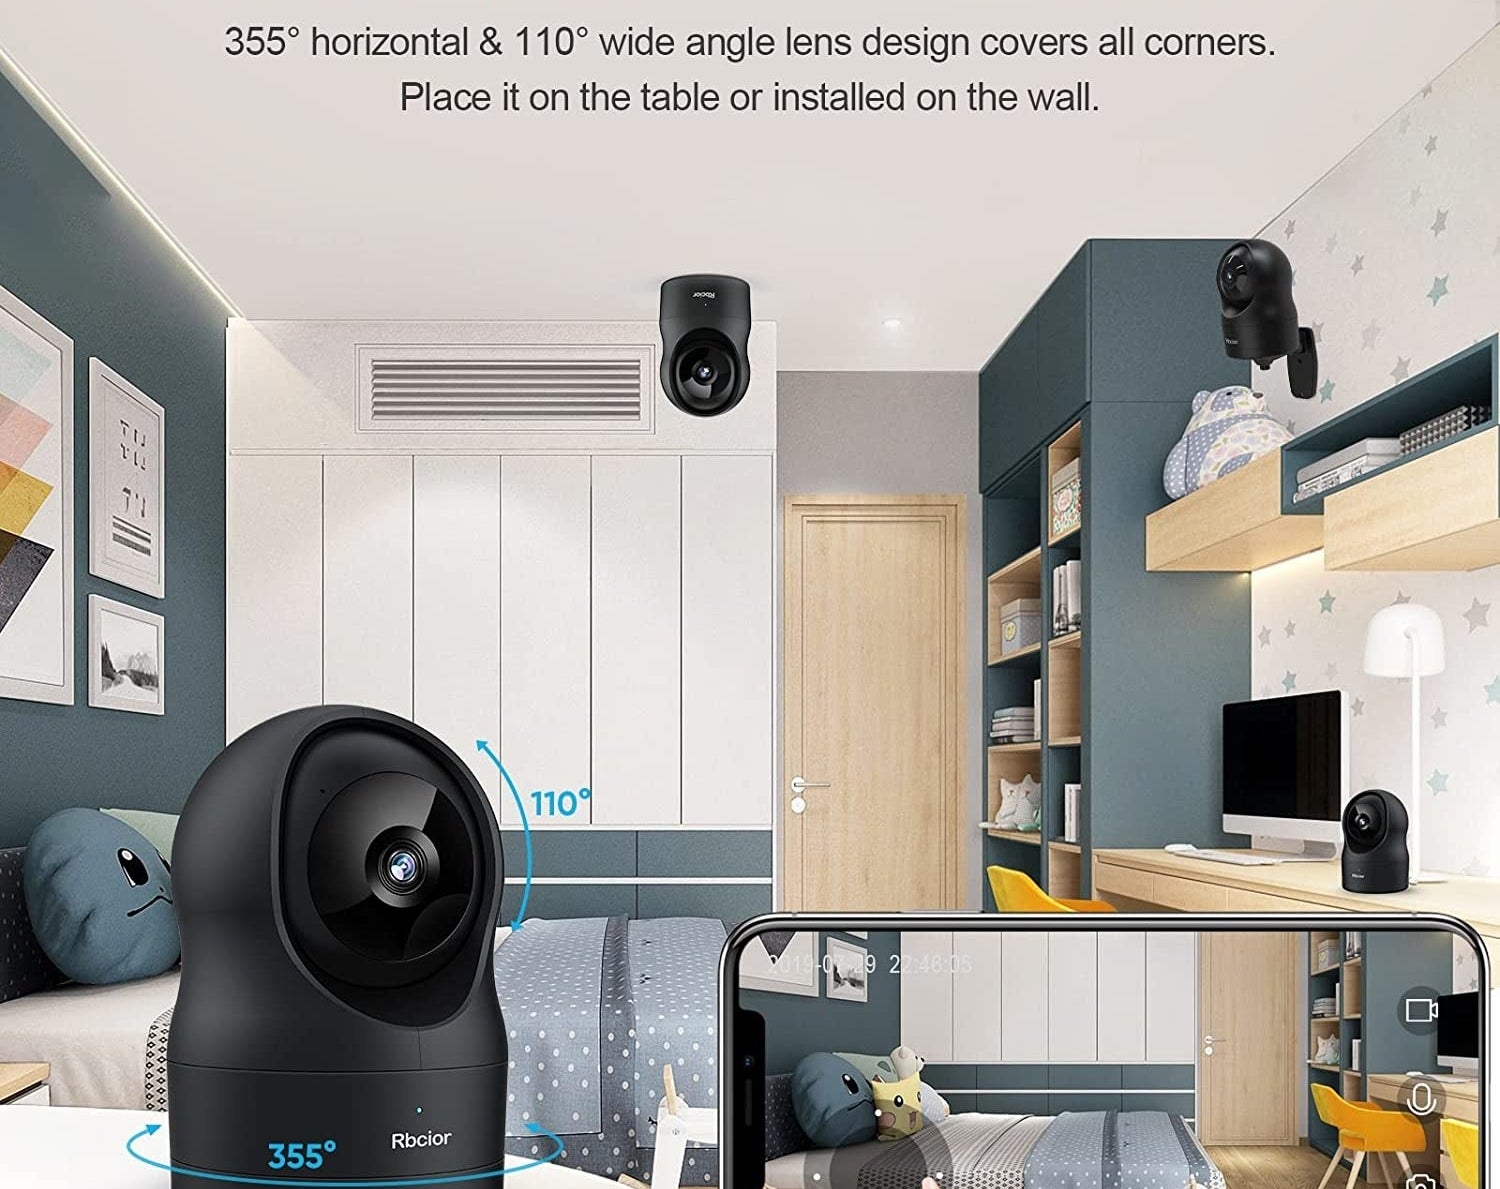 the security camera in a room shown in various configurations like from a ceiling or wall